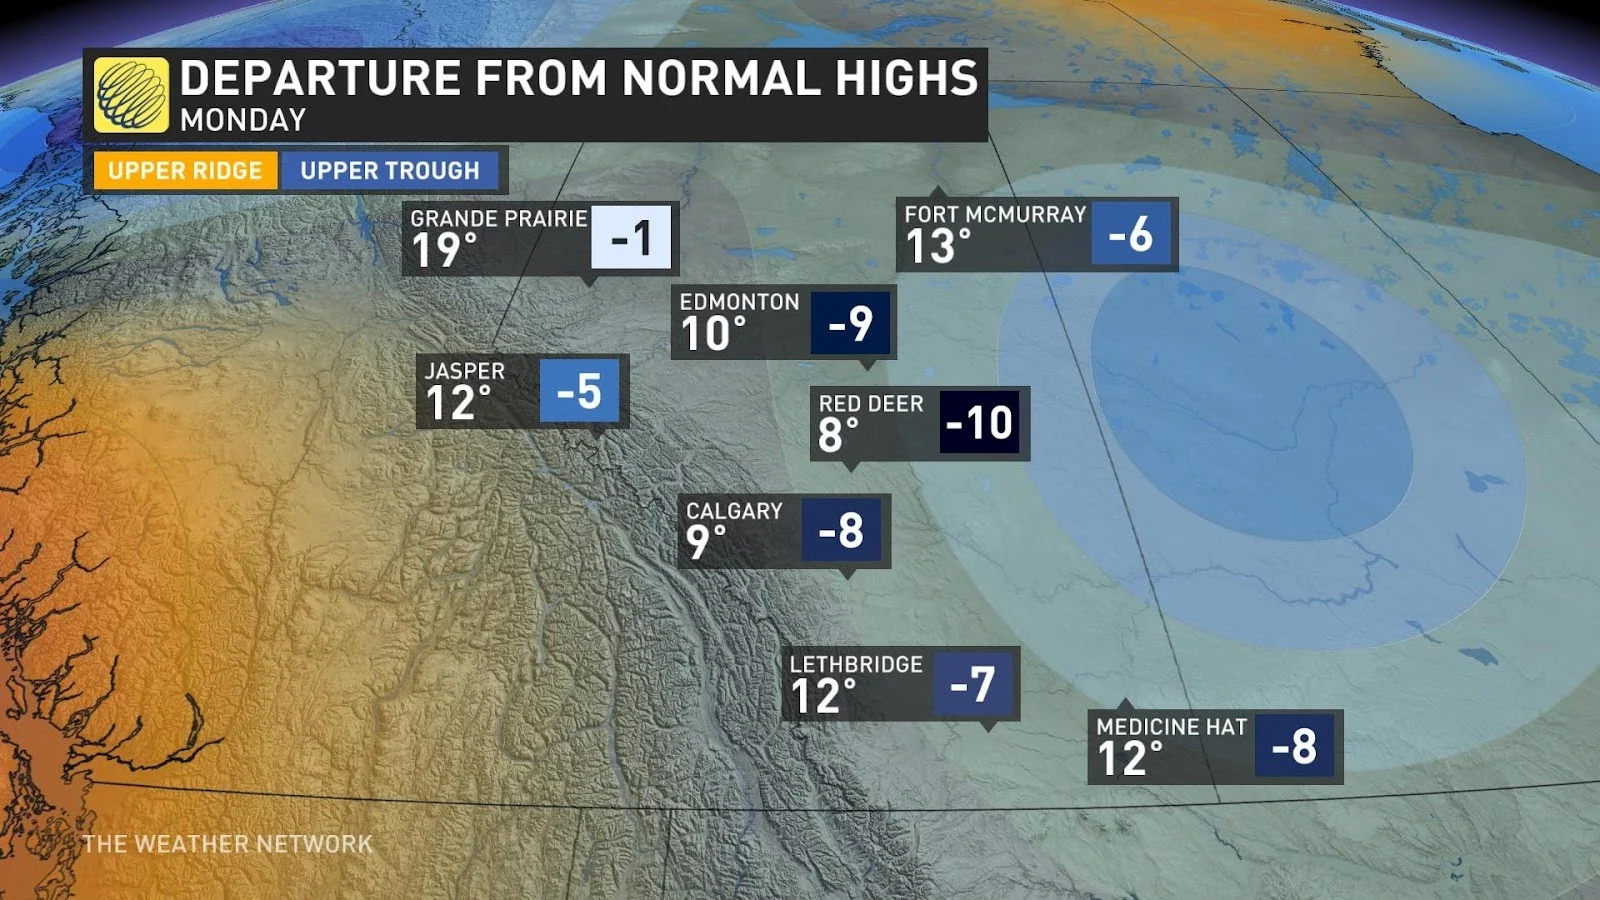 Alberta departure from normal highs Monday